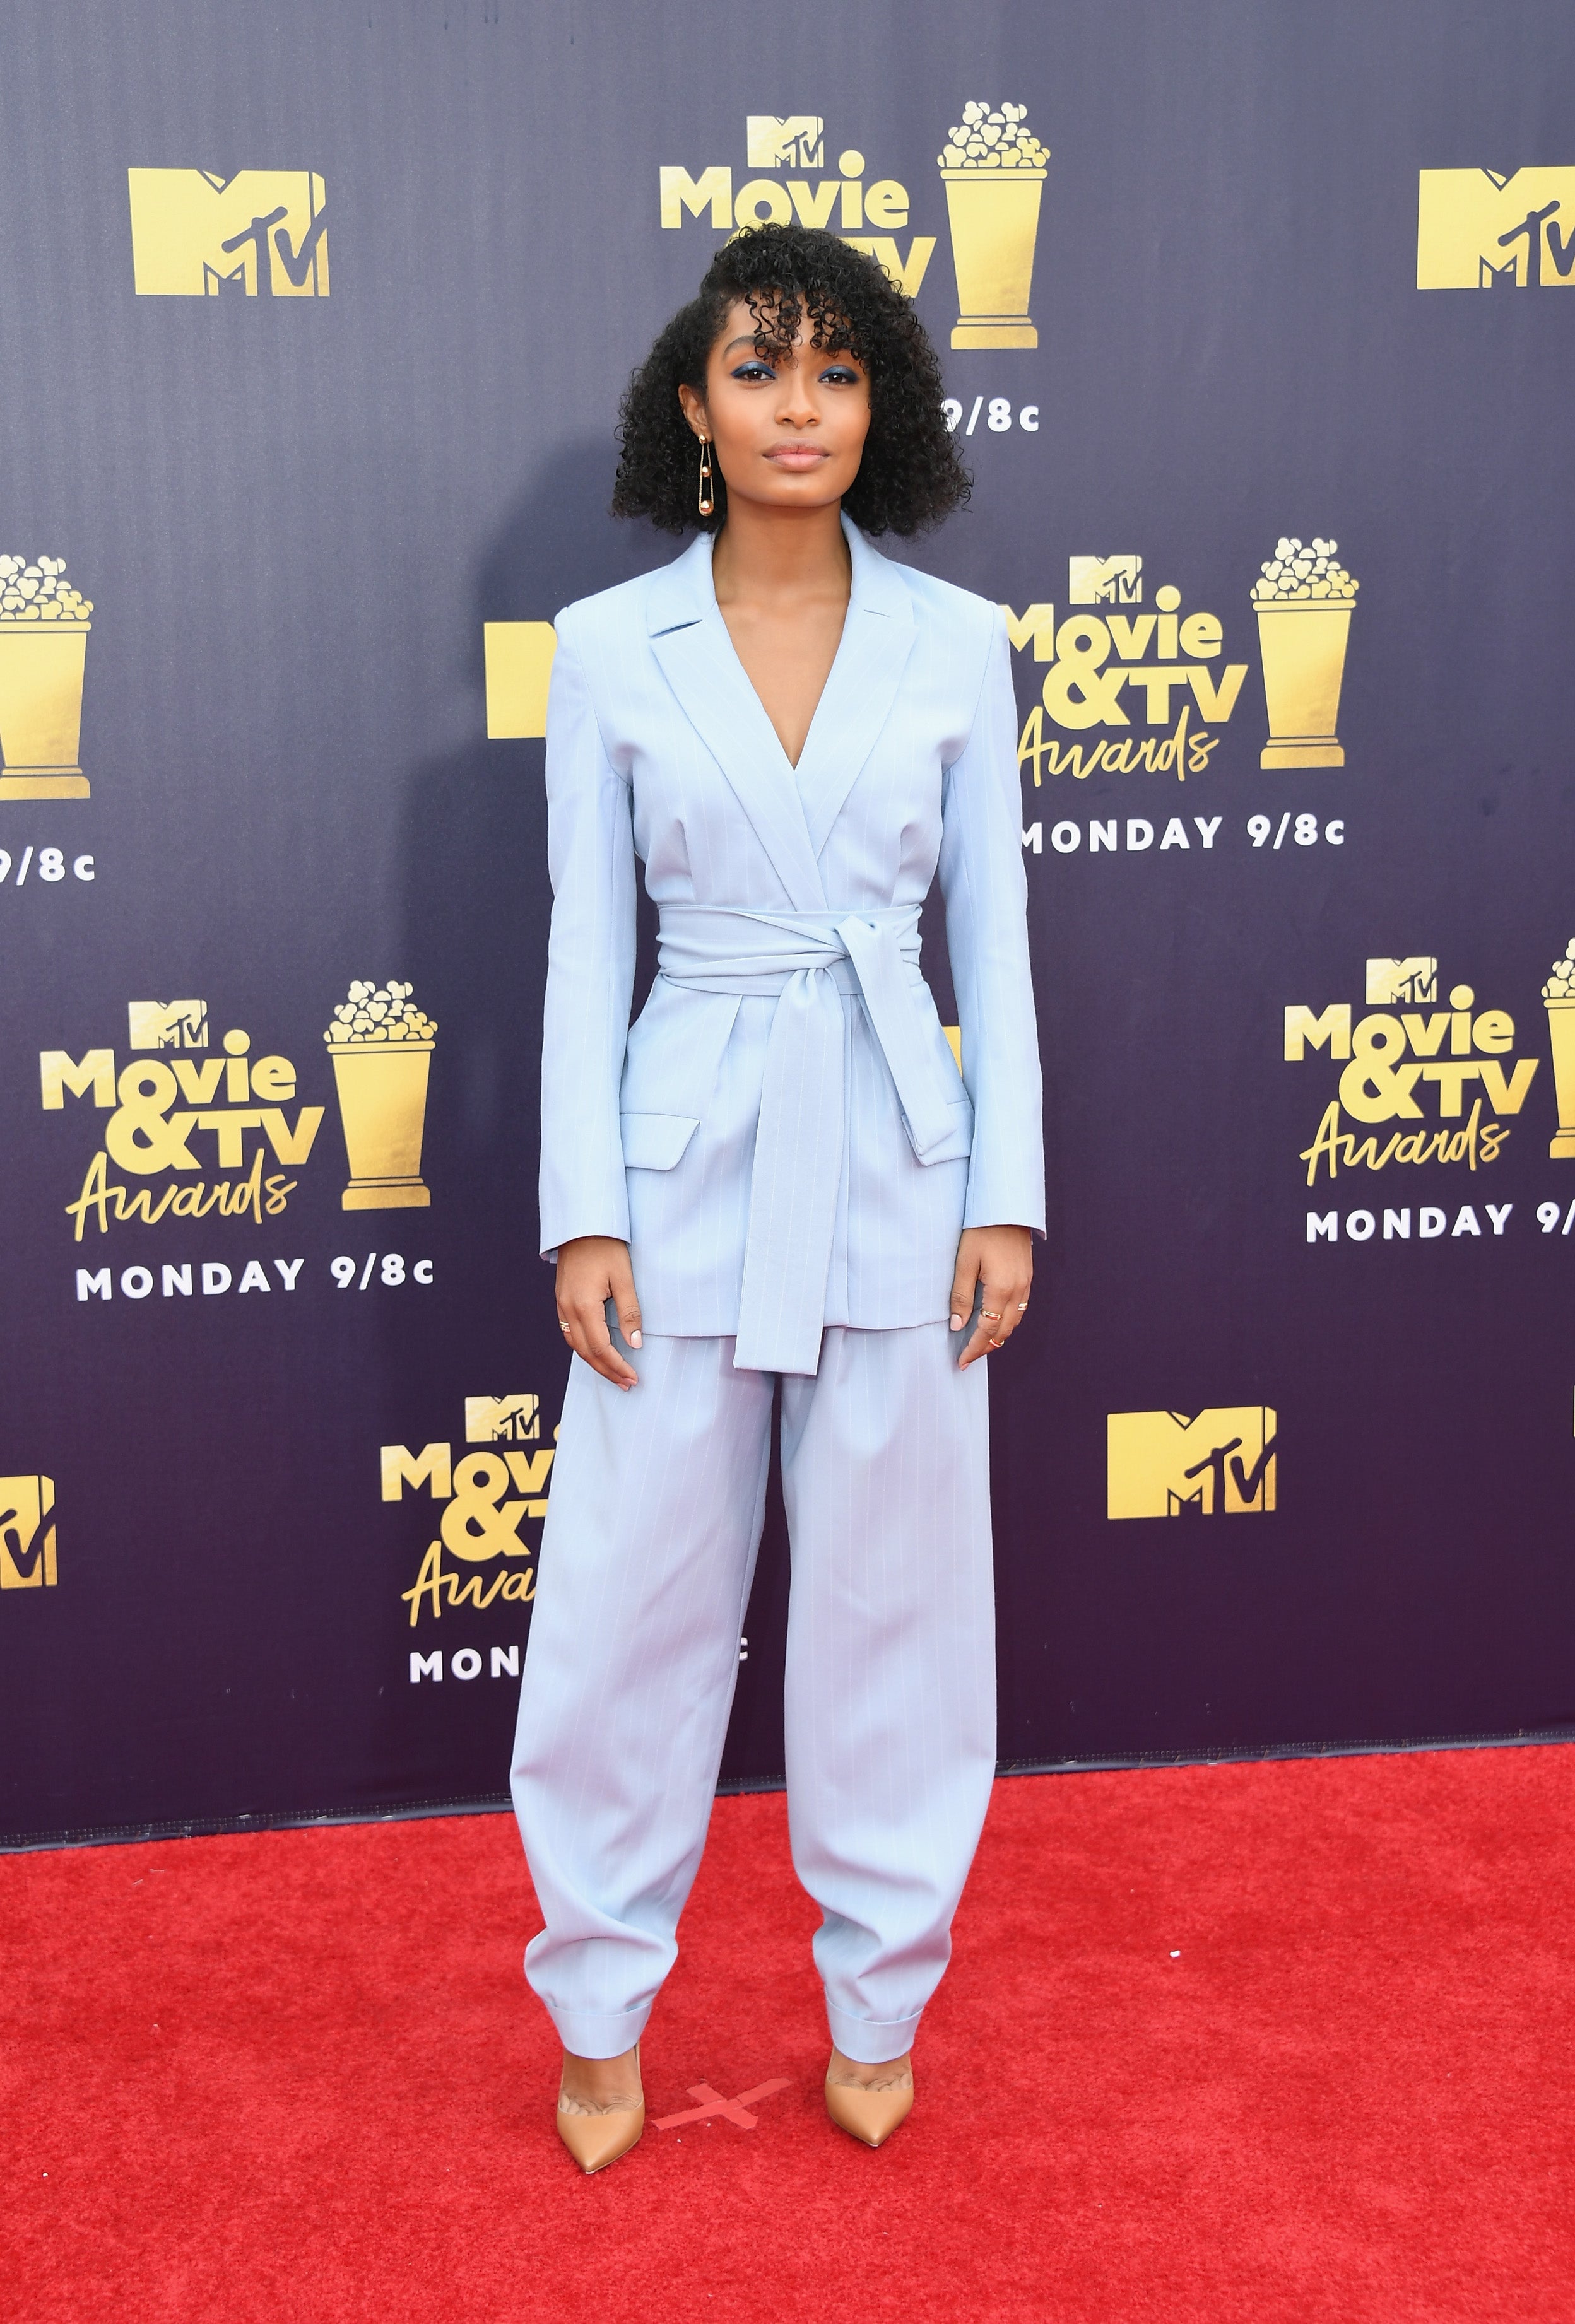 Why Yara Shahidi Wearing A Zoot Suit Is So Culturally Significant
